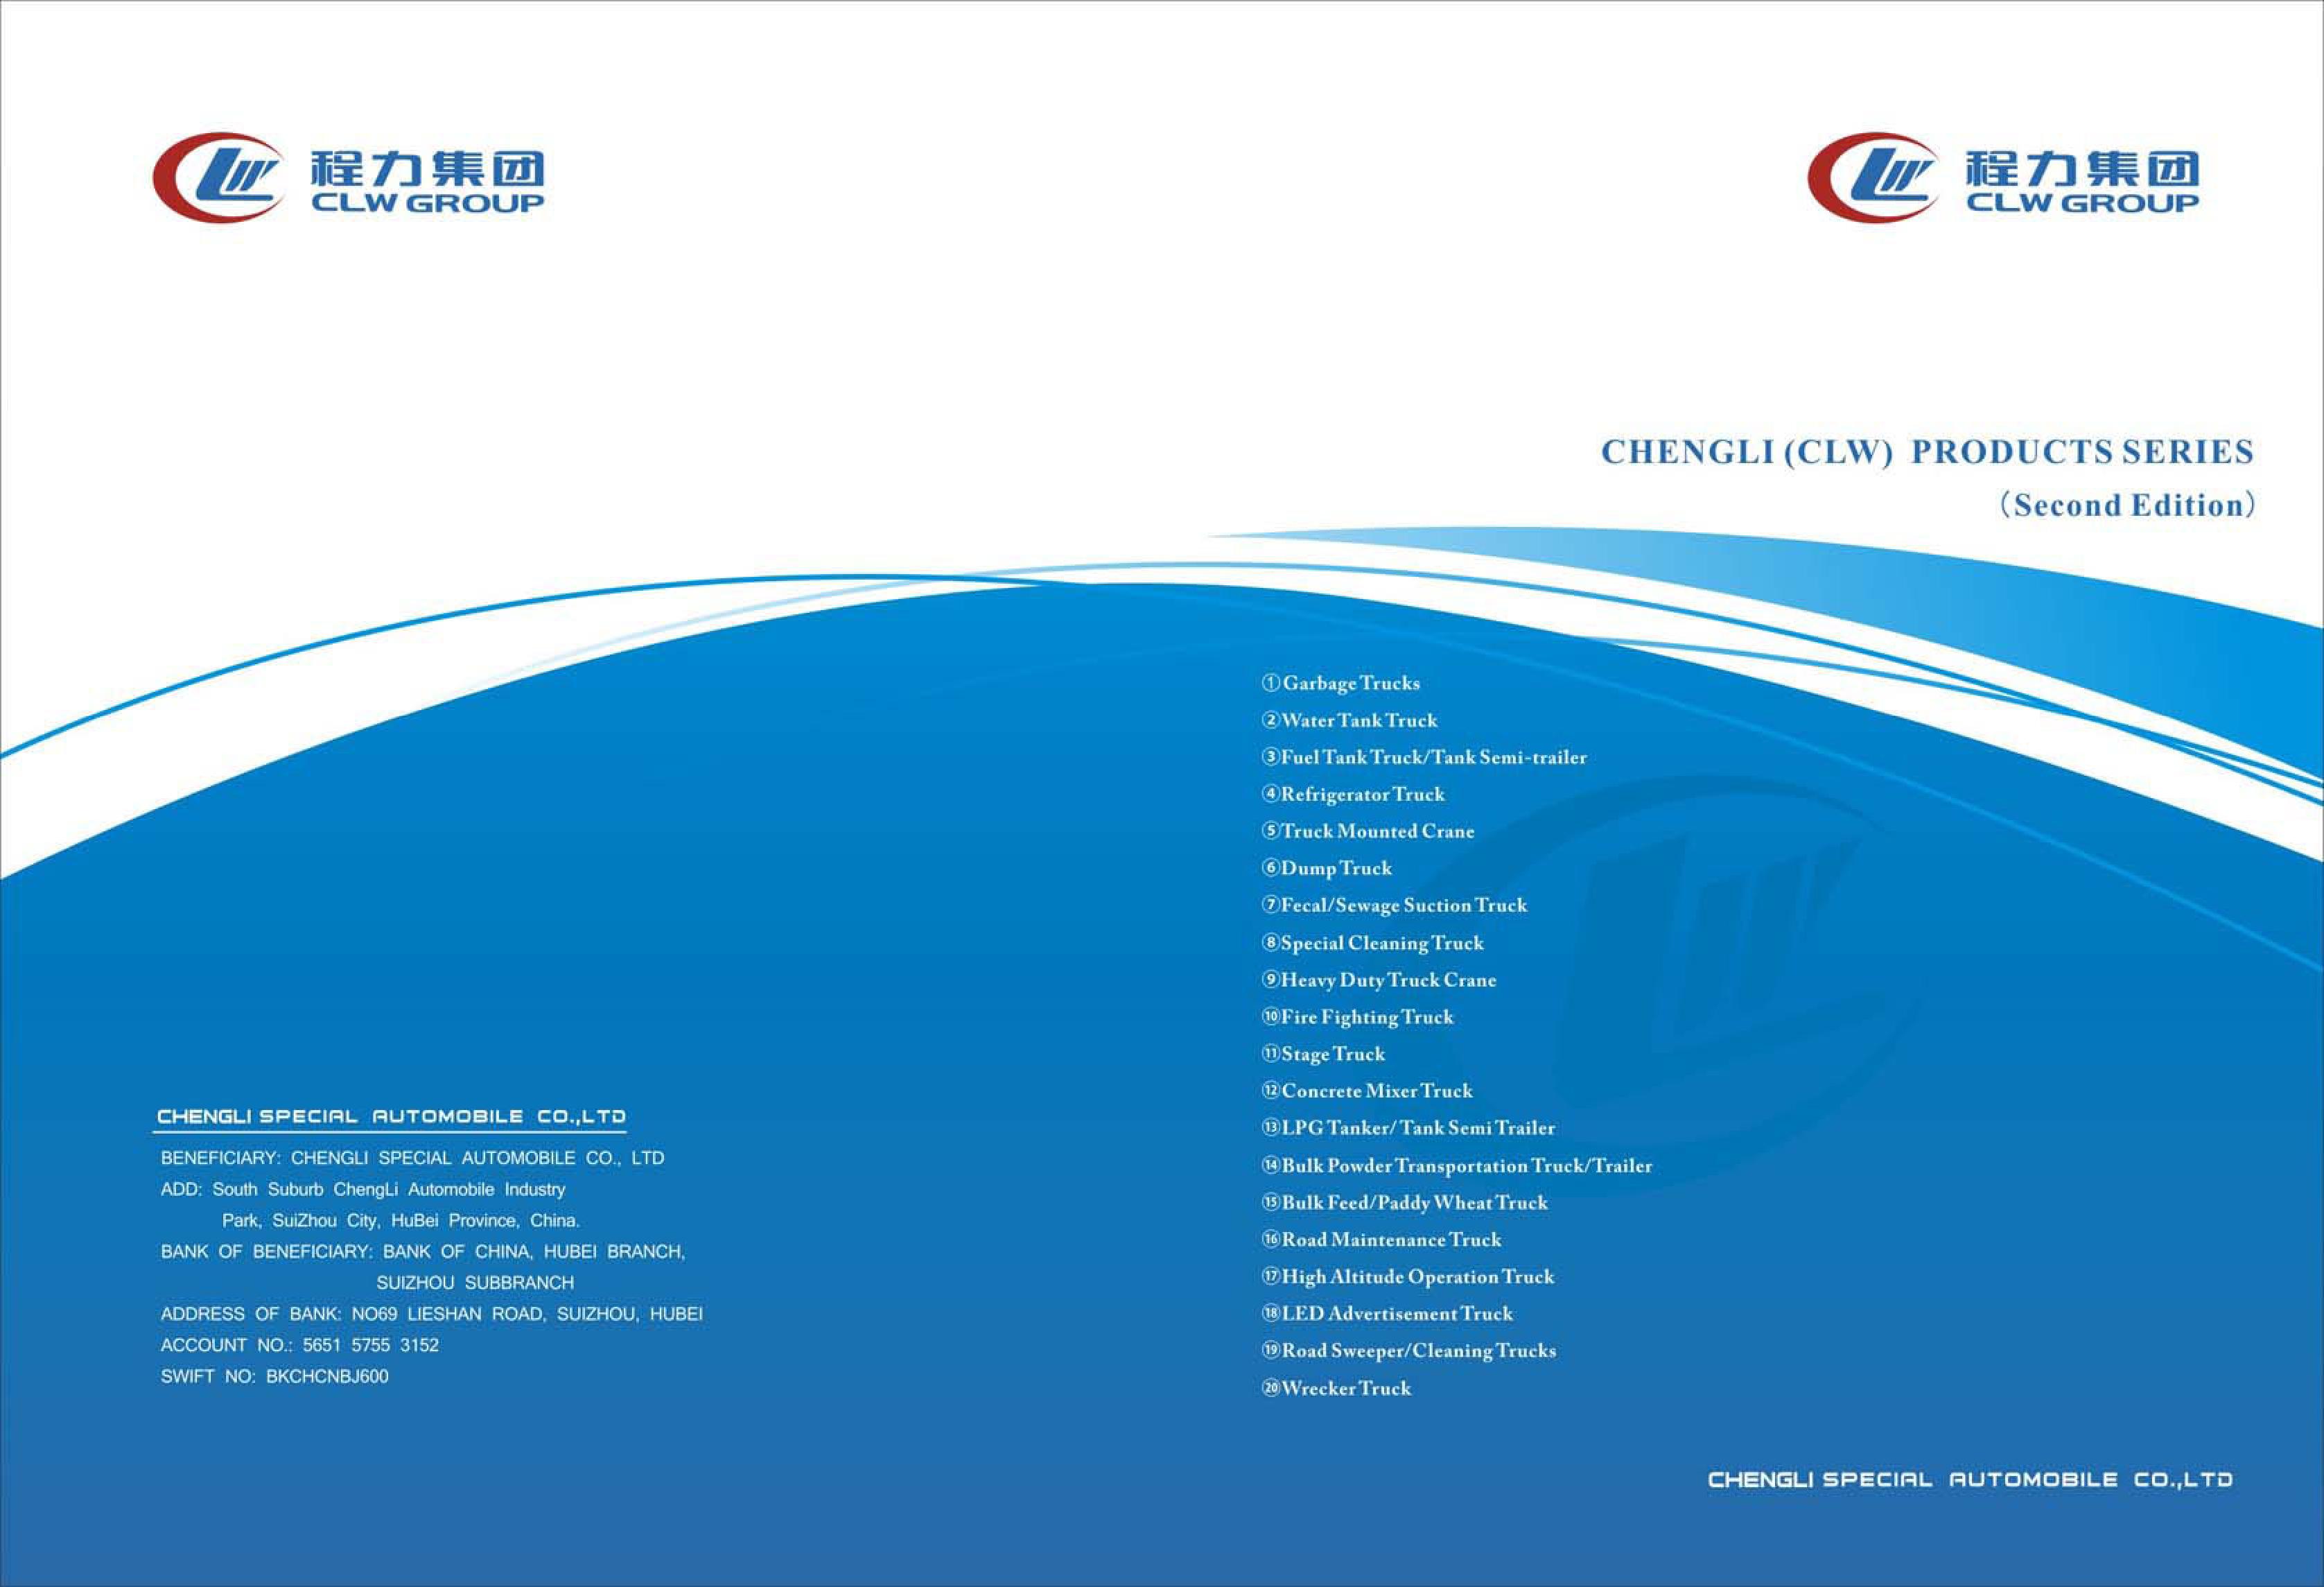 2019 CLW Group Catalog -_0.jpg